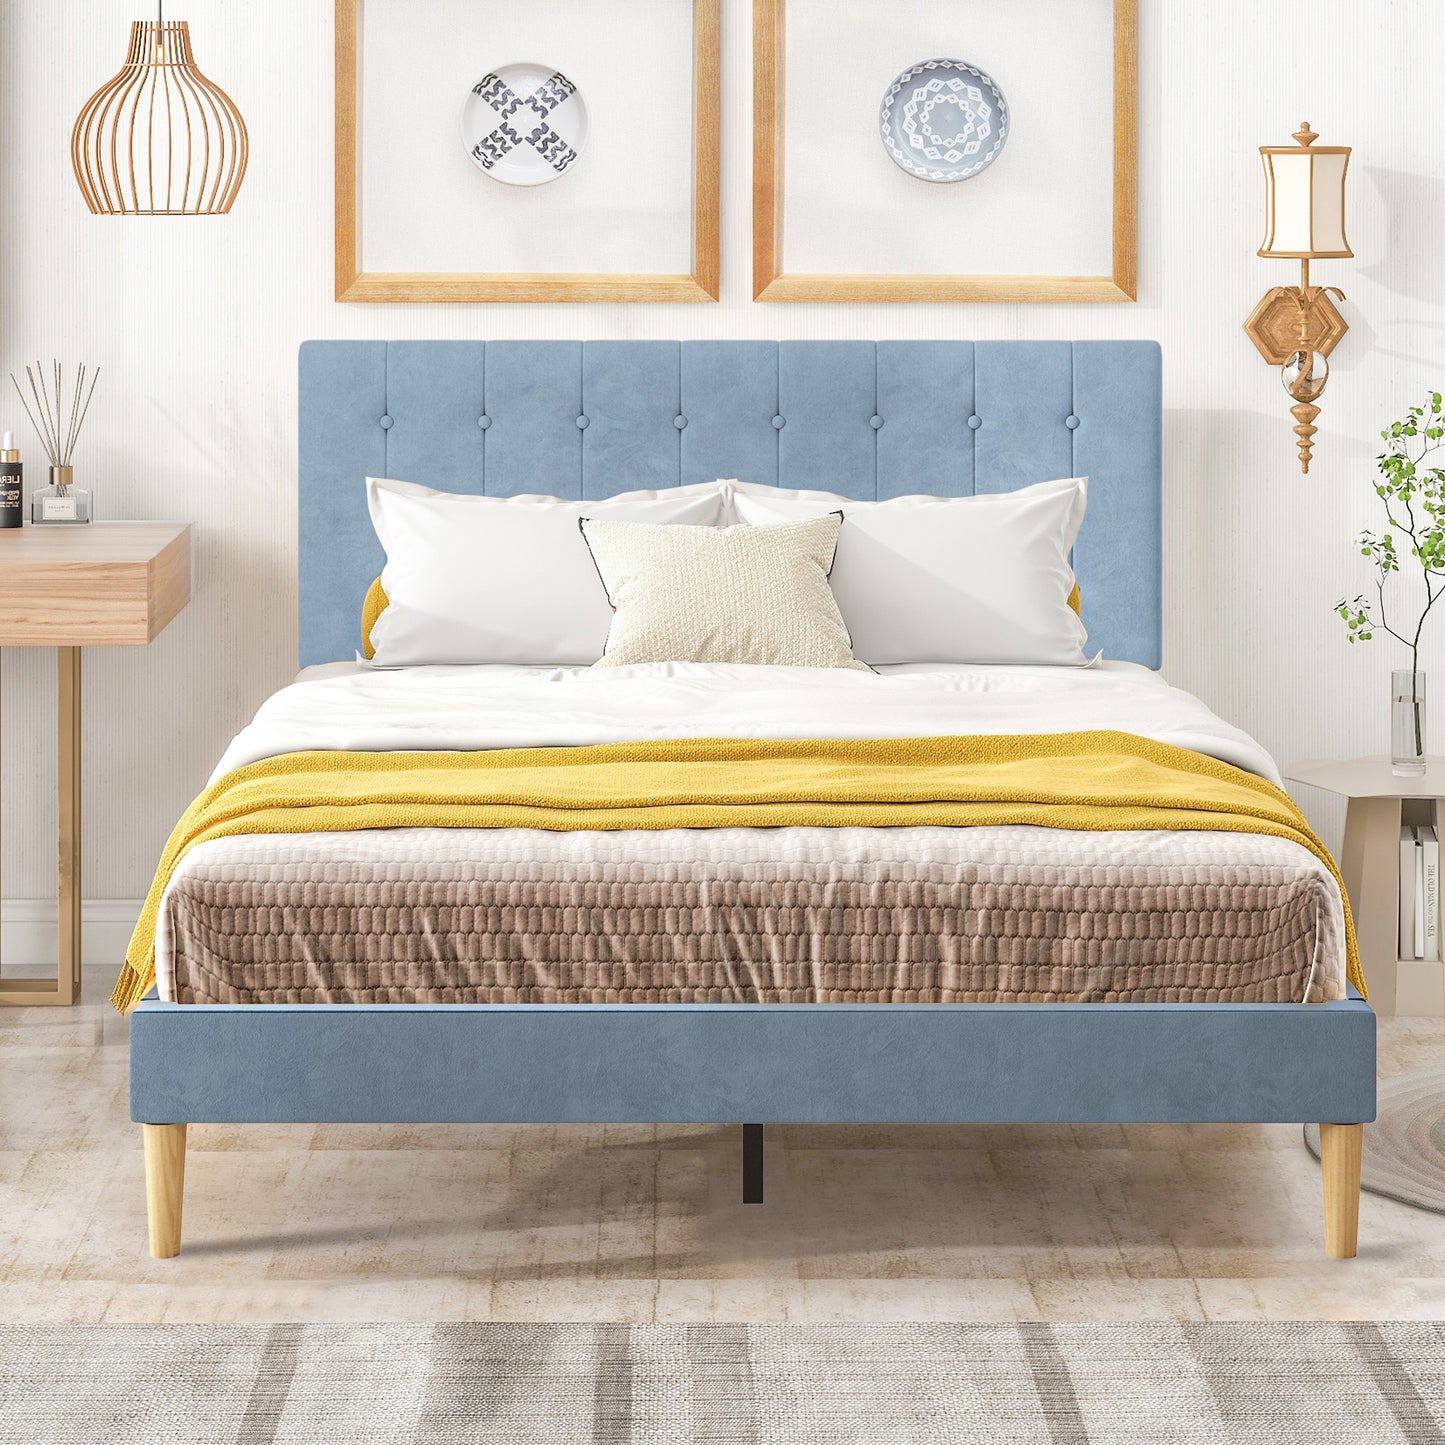 SYNGAR Beige Fabric Upholstered Platform Bed Frame Twin Size with Rivet Wingback Headboard, Metal Frame Mattress Foundation with Strong Wooden Slat Support, No Box Spring Needed, Easy Assembly